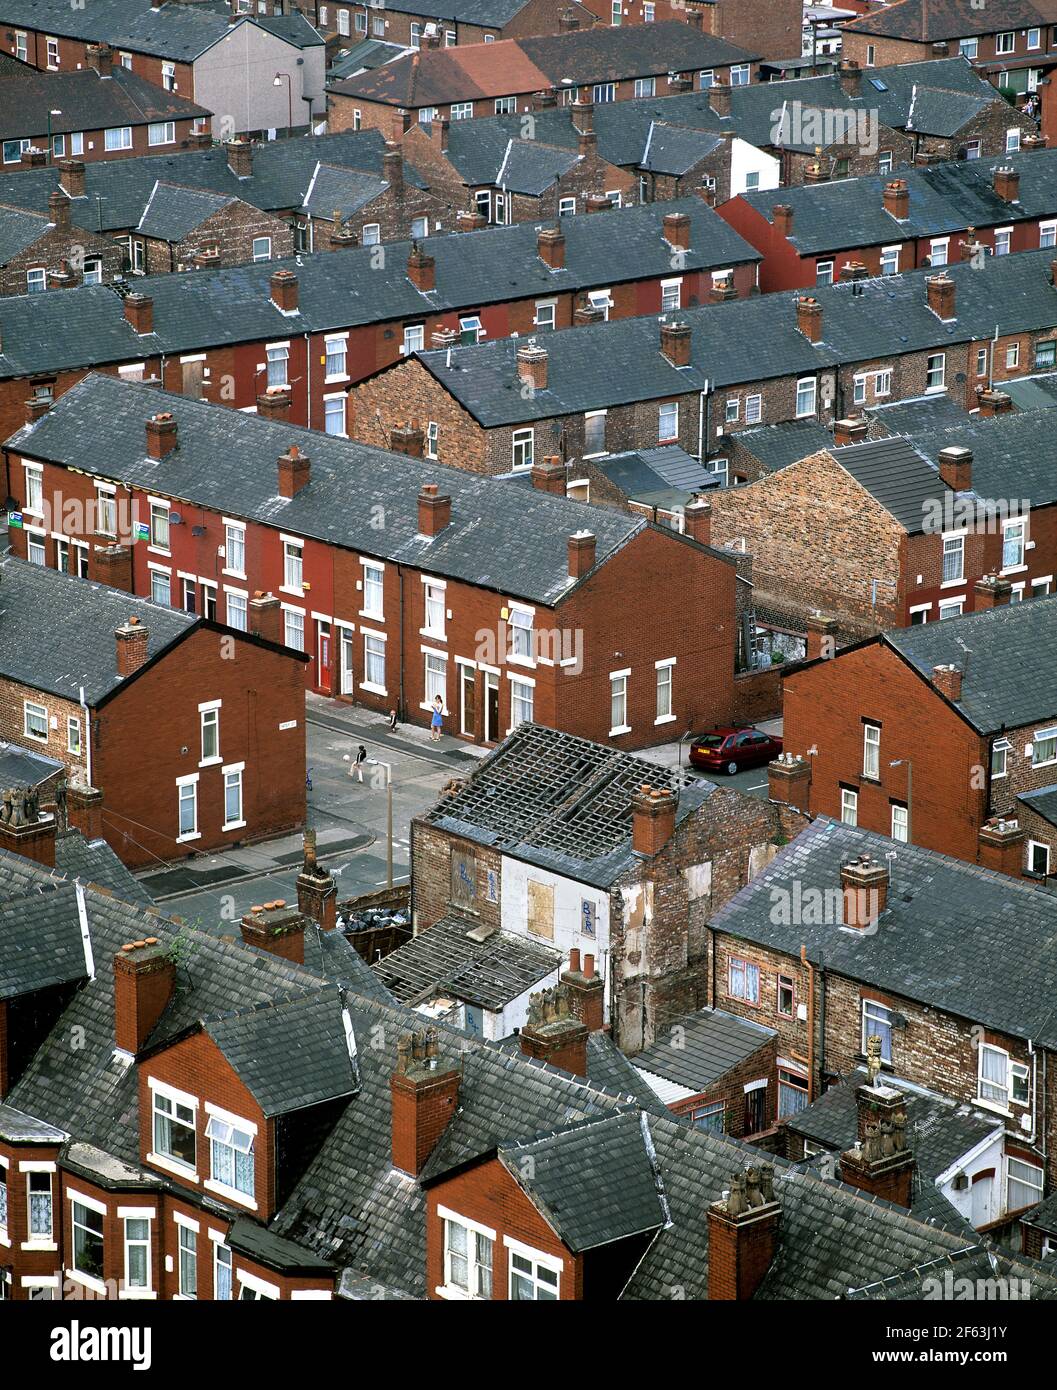 A derelict house in Santley St, Longsight, Manchester, M12.  Photograph taken in 2003. Stock Photo